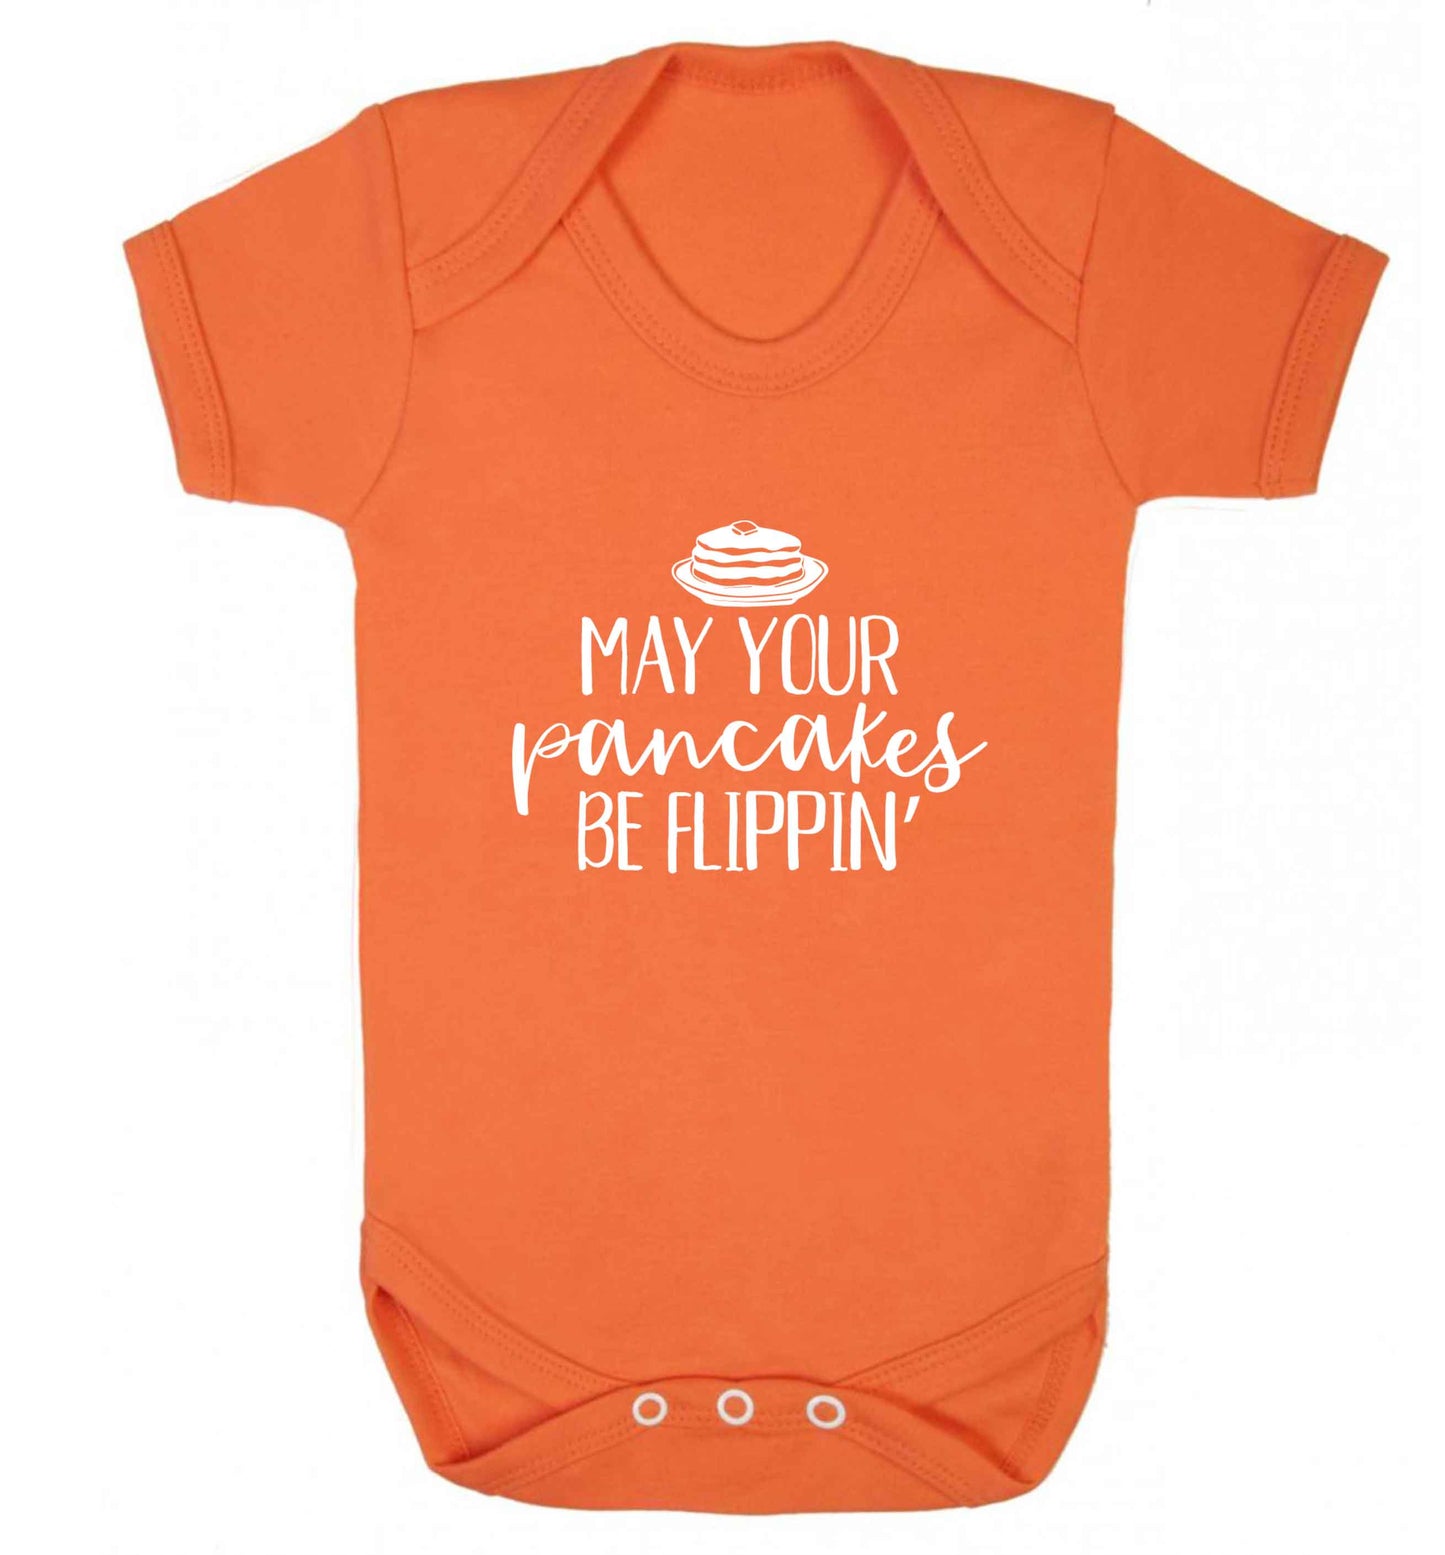 May your pancakes be flippin' baby vest orange 18-24 months